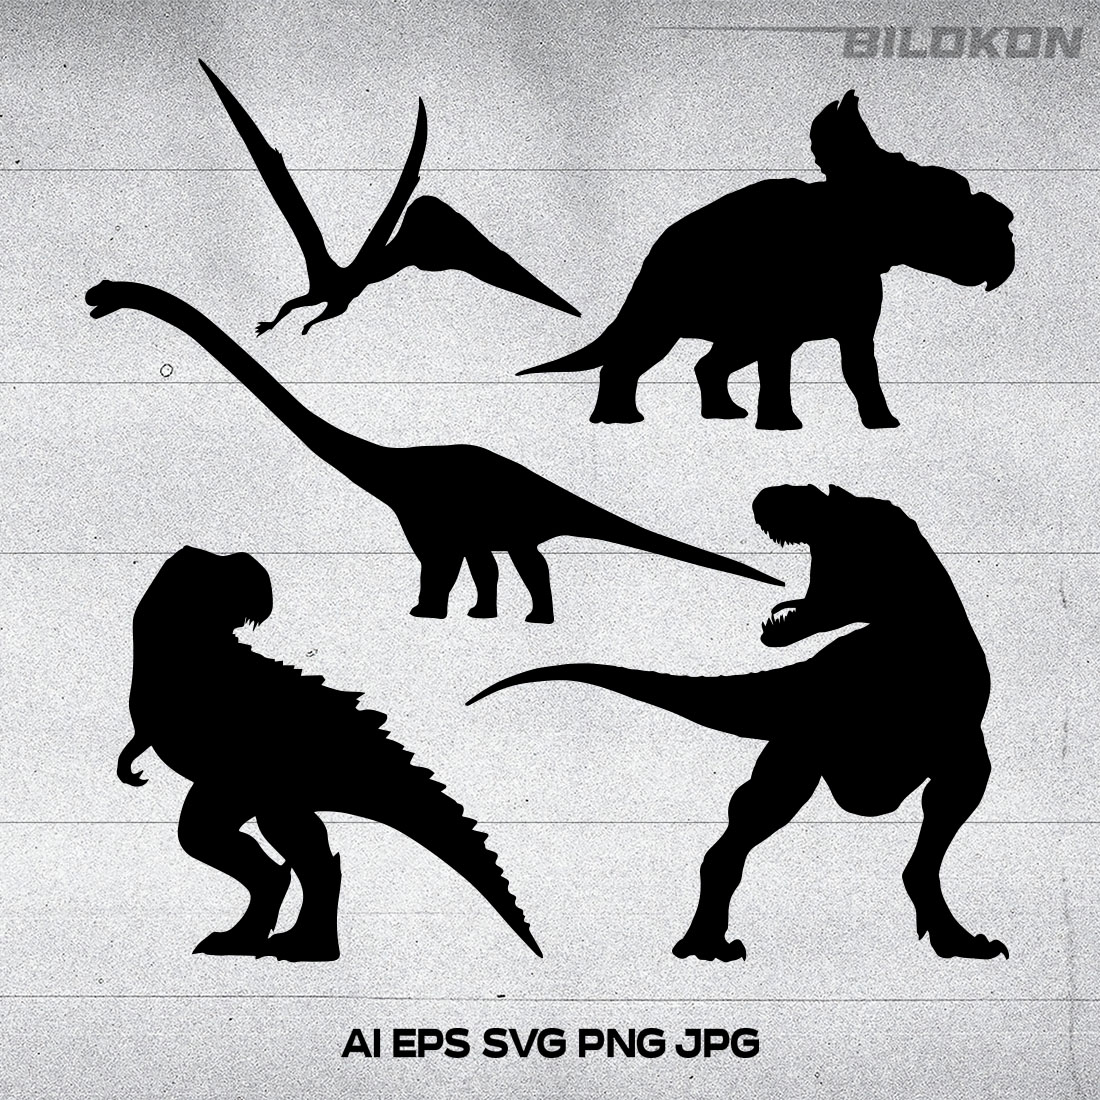 The silhouettes of dinosaurs are shown in black and white.